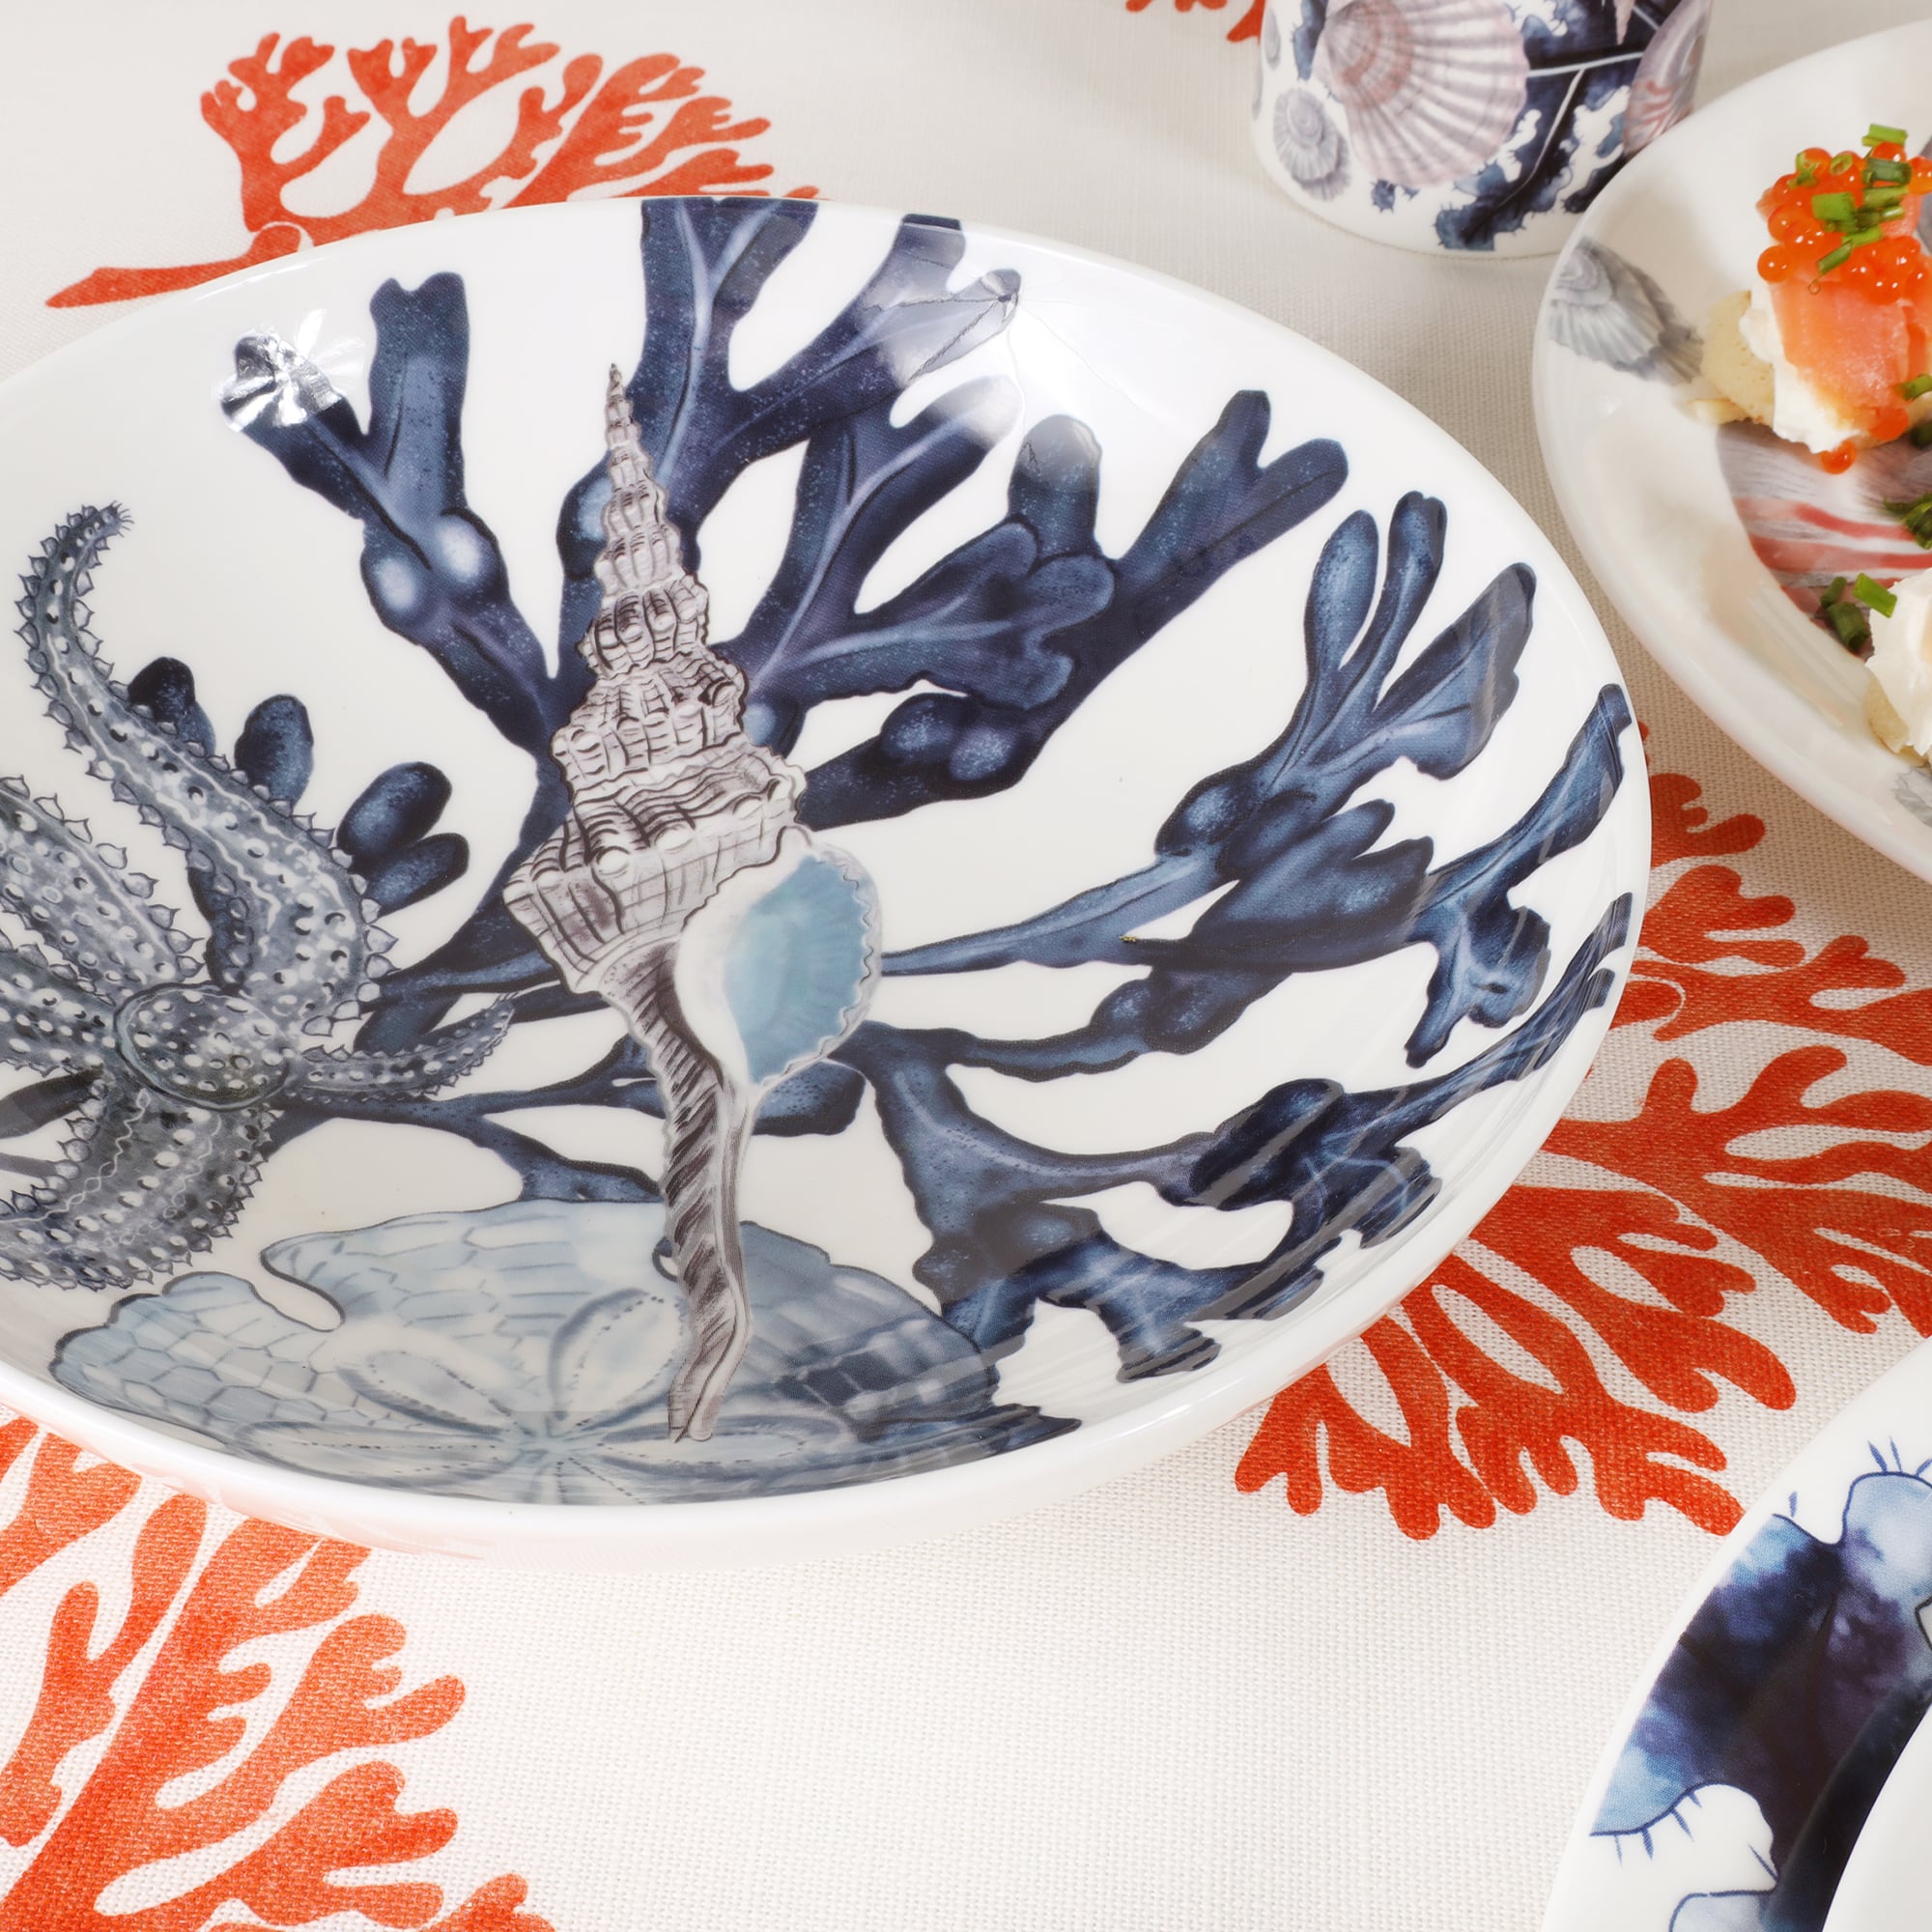 Close up of Beachcomber design pasta bowl has Dark Blue seaweed fronds,starfish,whelk and a sand dollar all in co ordinating blues.The bowl is placed on orange and white fistral fabric.In the background is a beachcomber jug and a plate of food